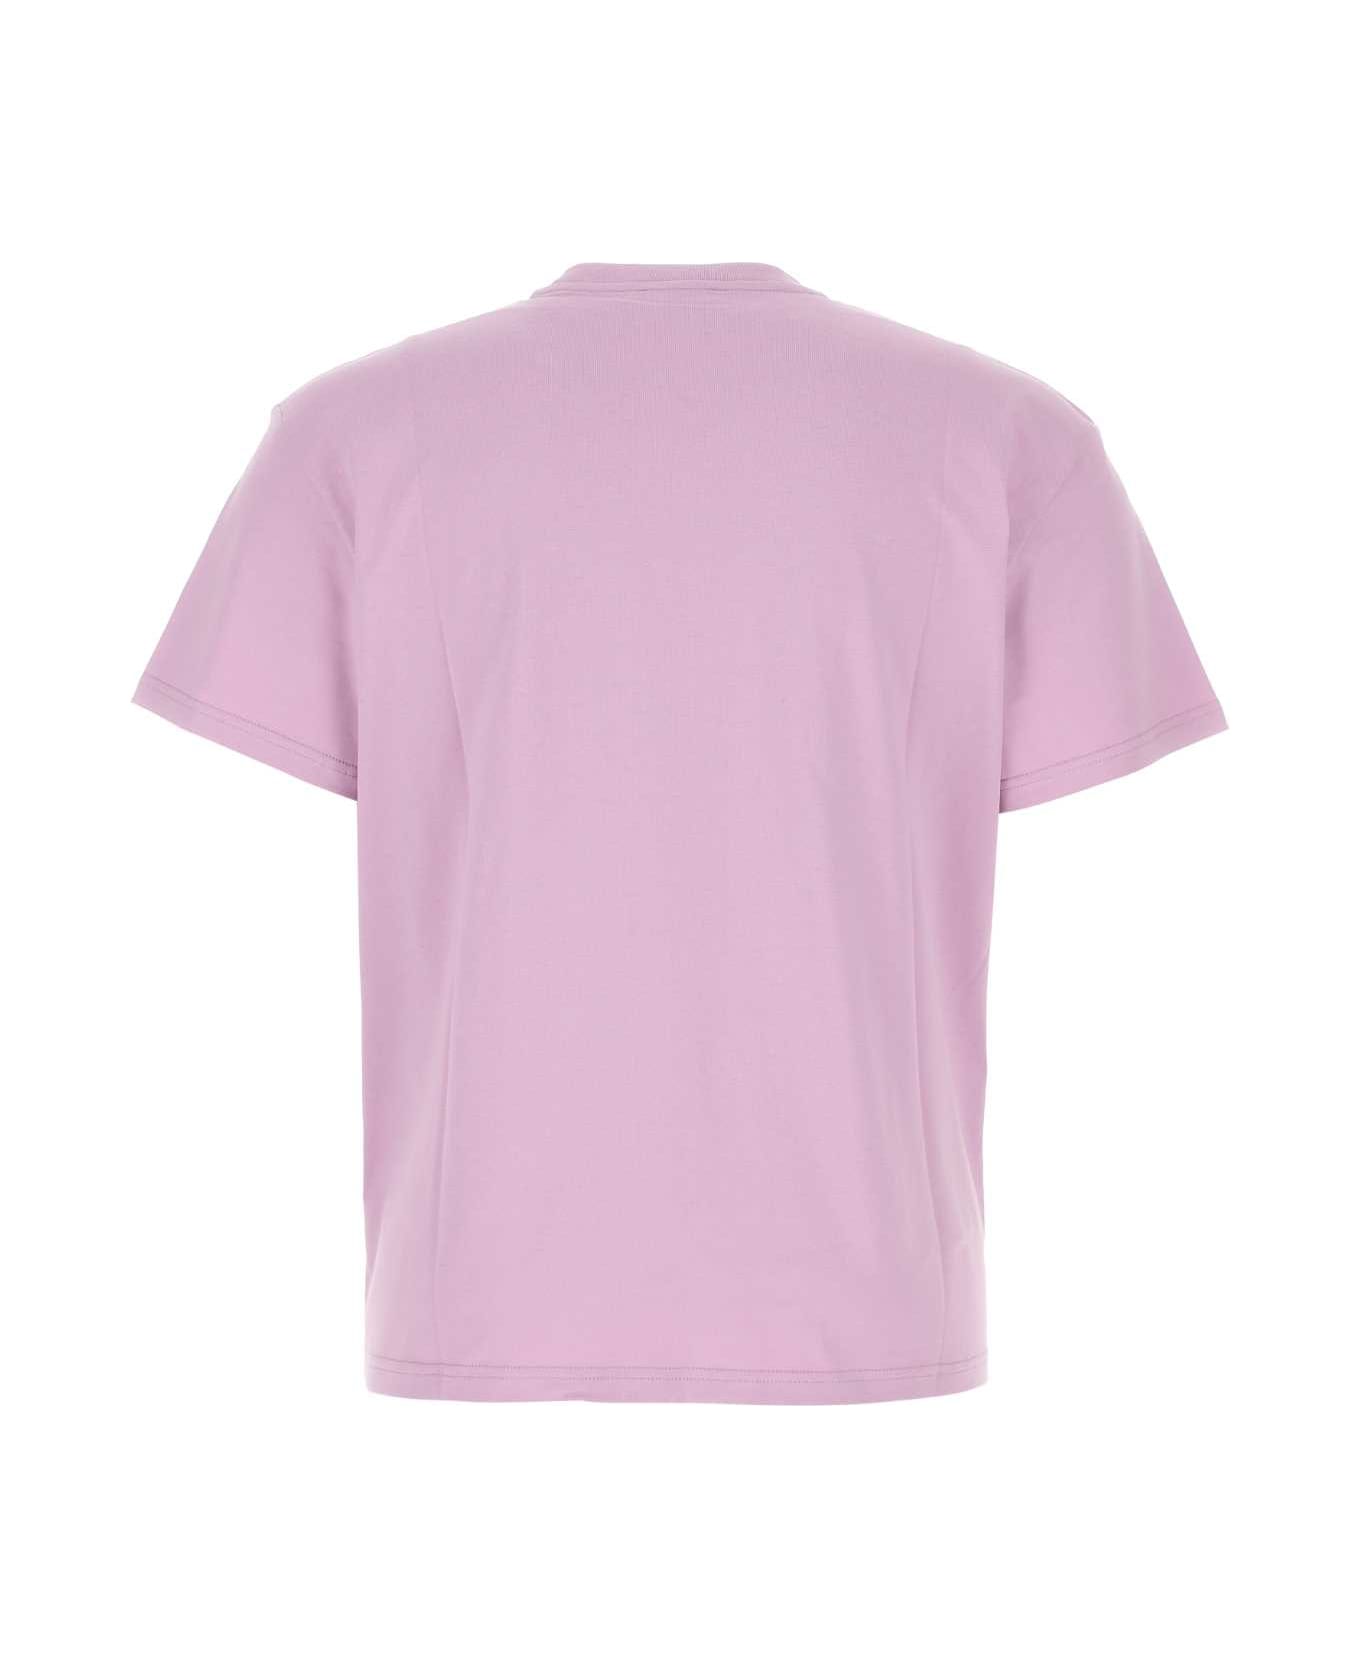 J.W. Anderson Lilac Cotton T-shirt - PINK